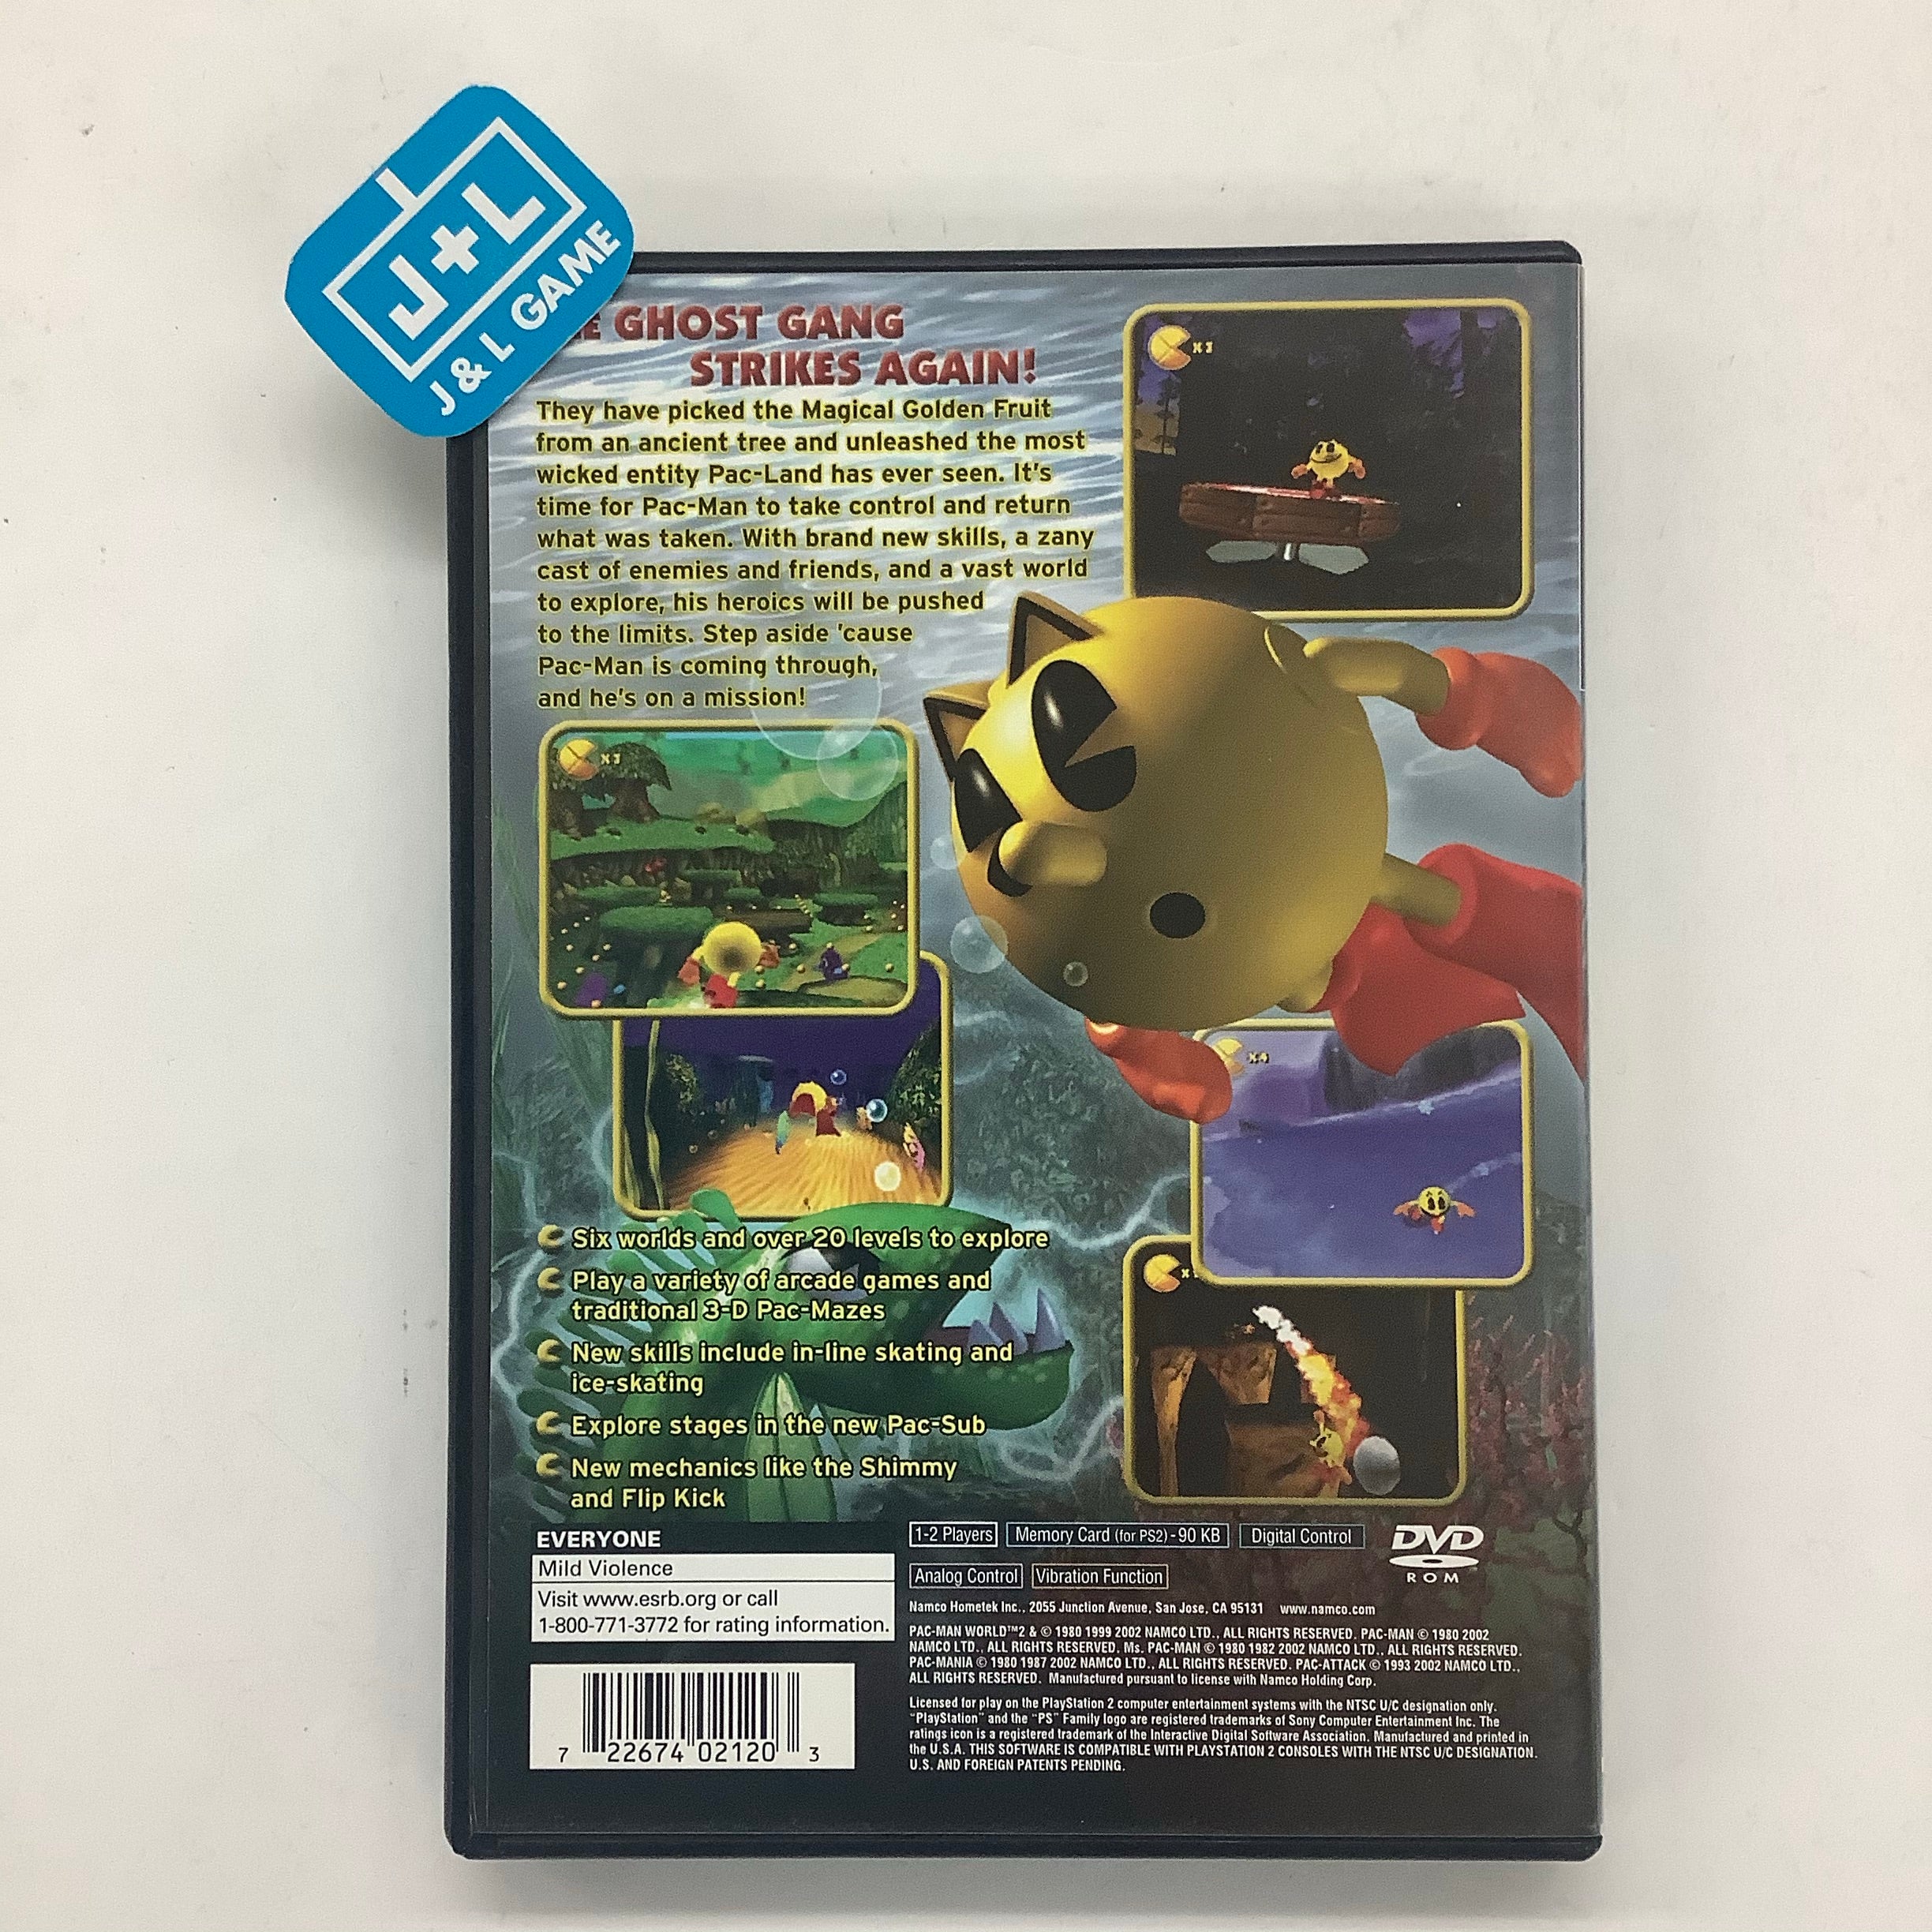 Pac-Man World 2 - (PS2) PlayStation 2 [Pre-Owned] Video Games Namco   